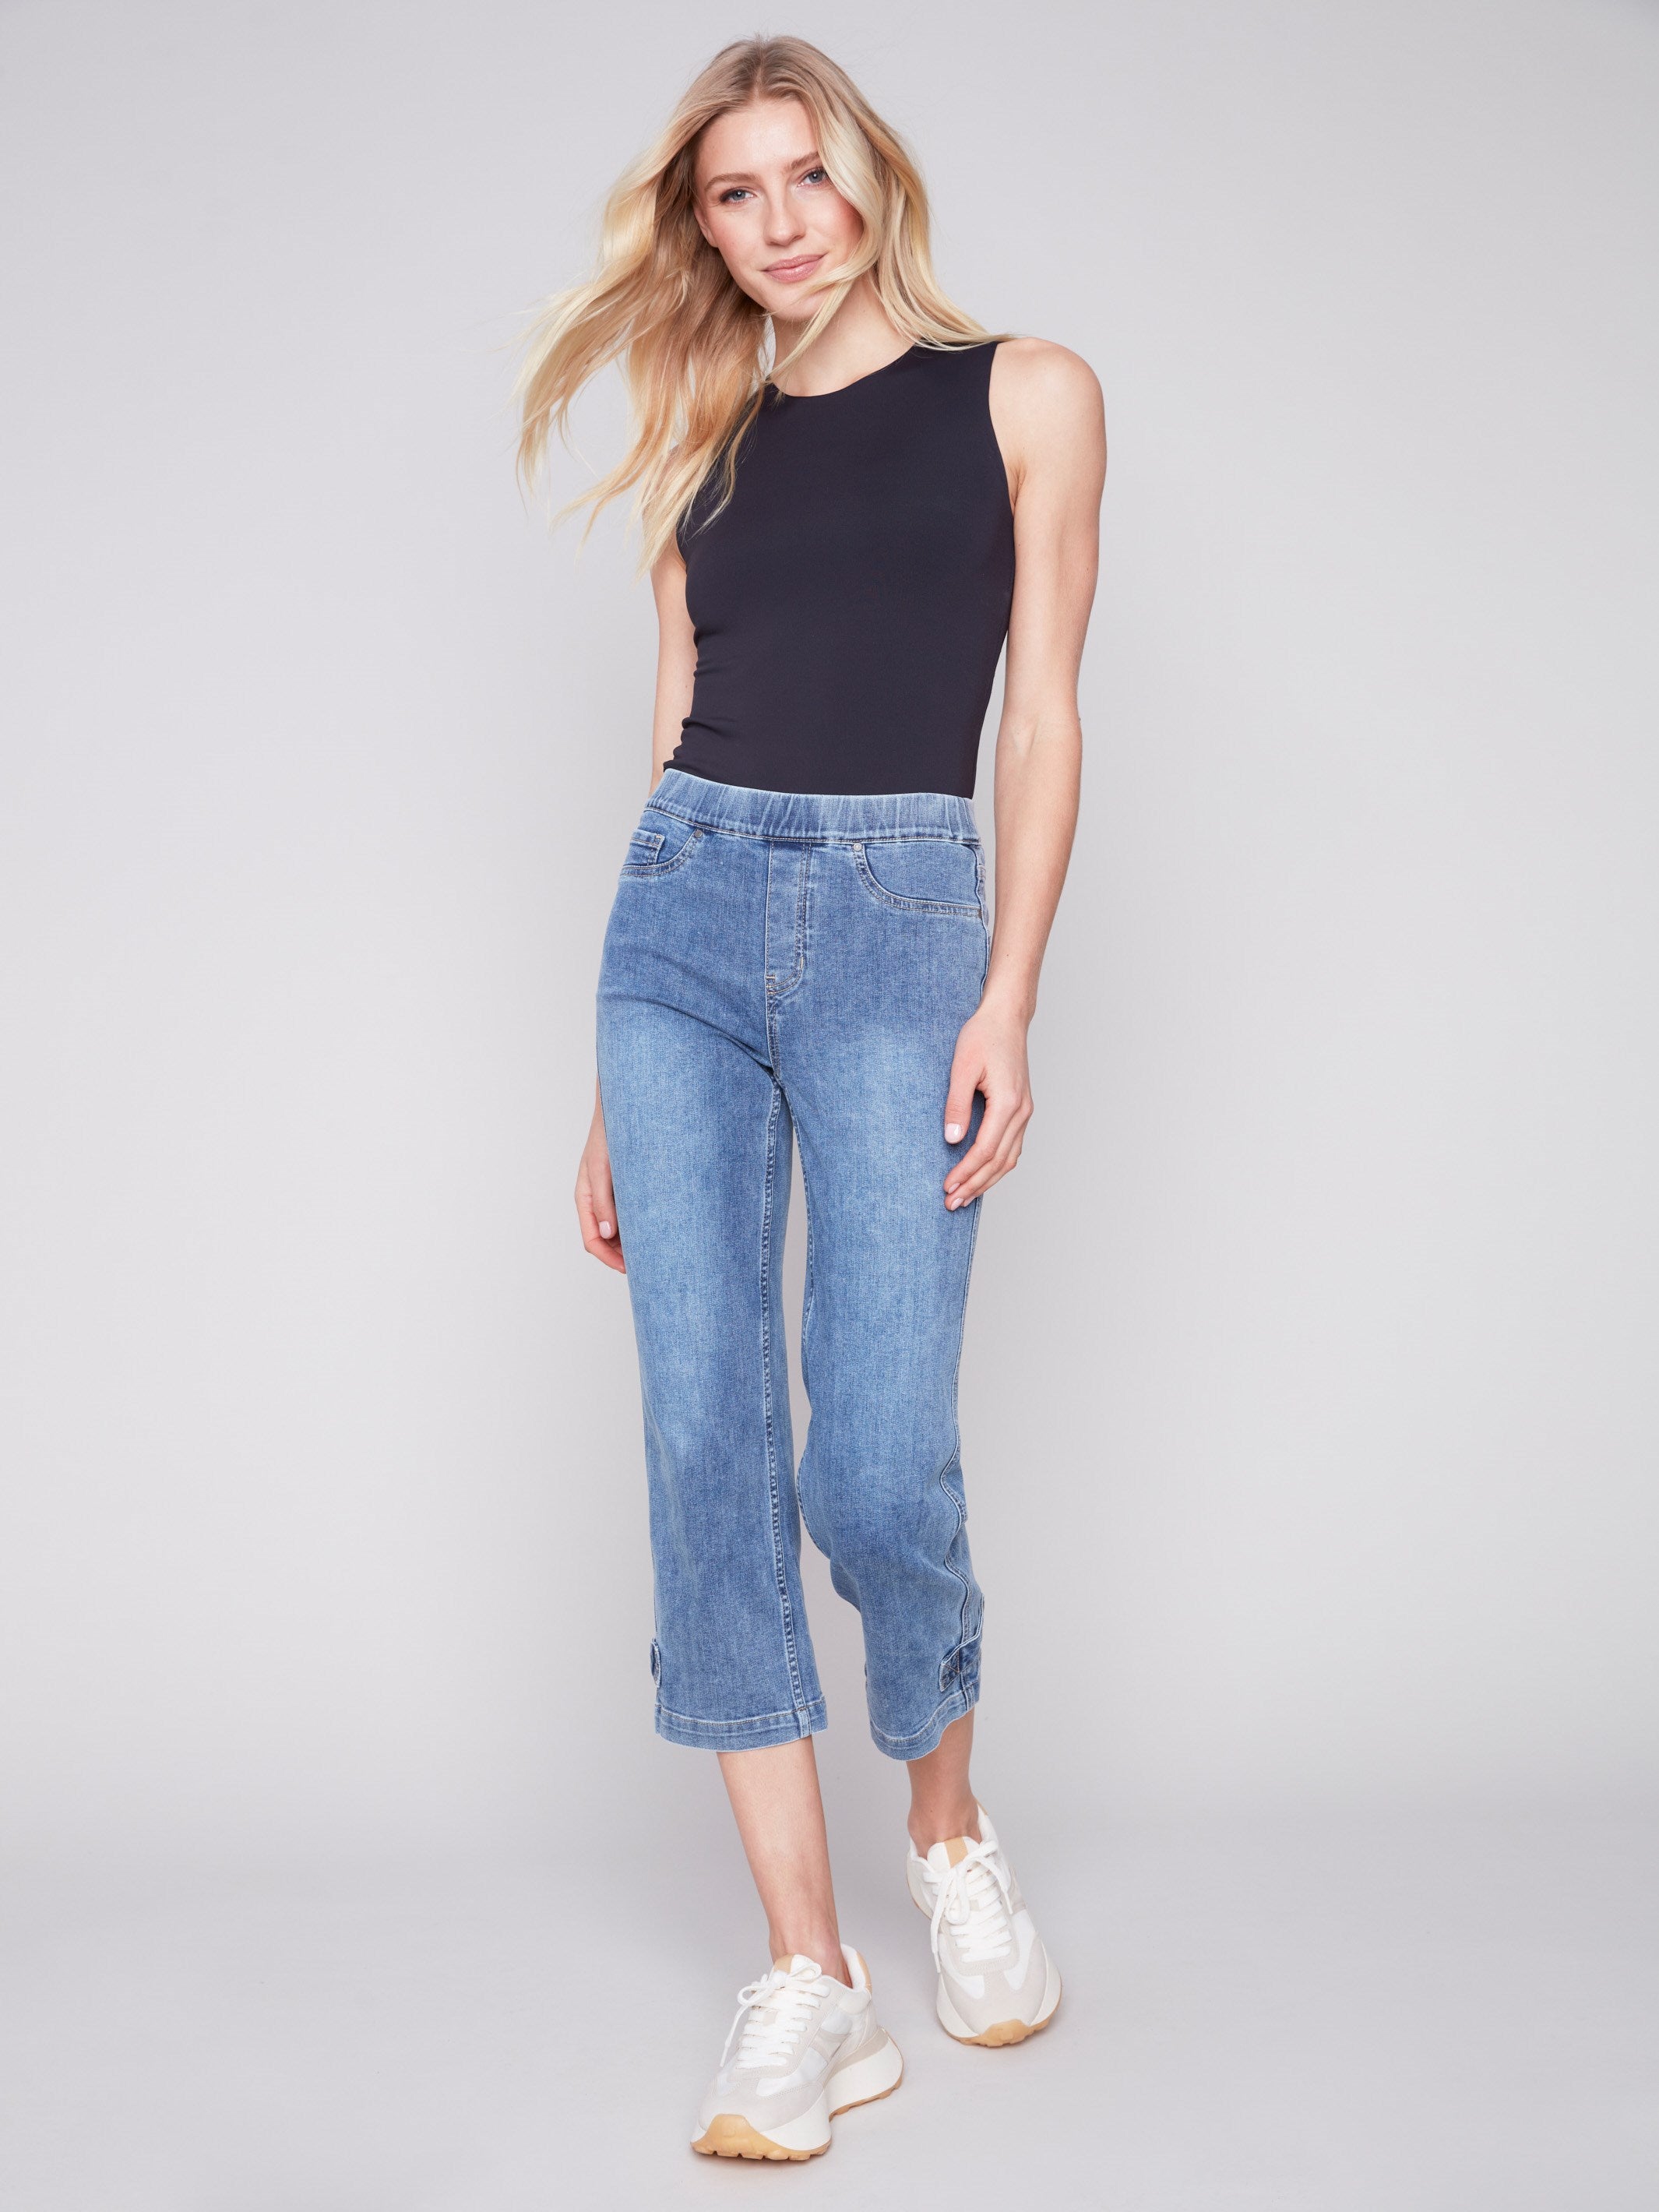 Cropped Pull-On Jeans with Hem Tab - Medium Blue - Charlie B Collection Canada - Image 1